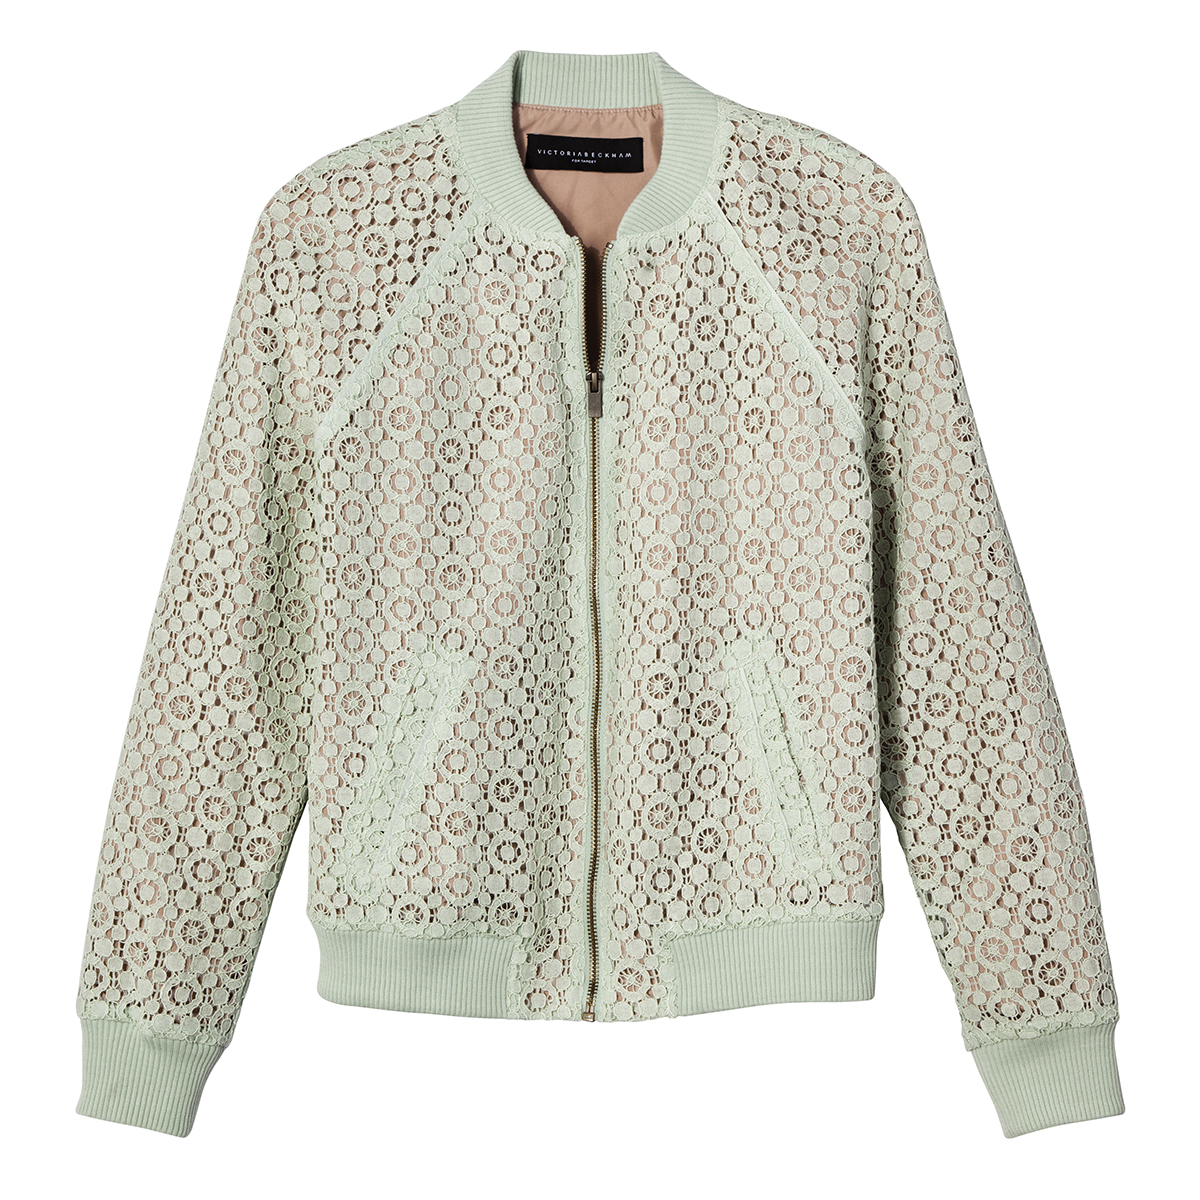 Mint Green Lace Bomber, $35